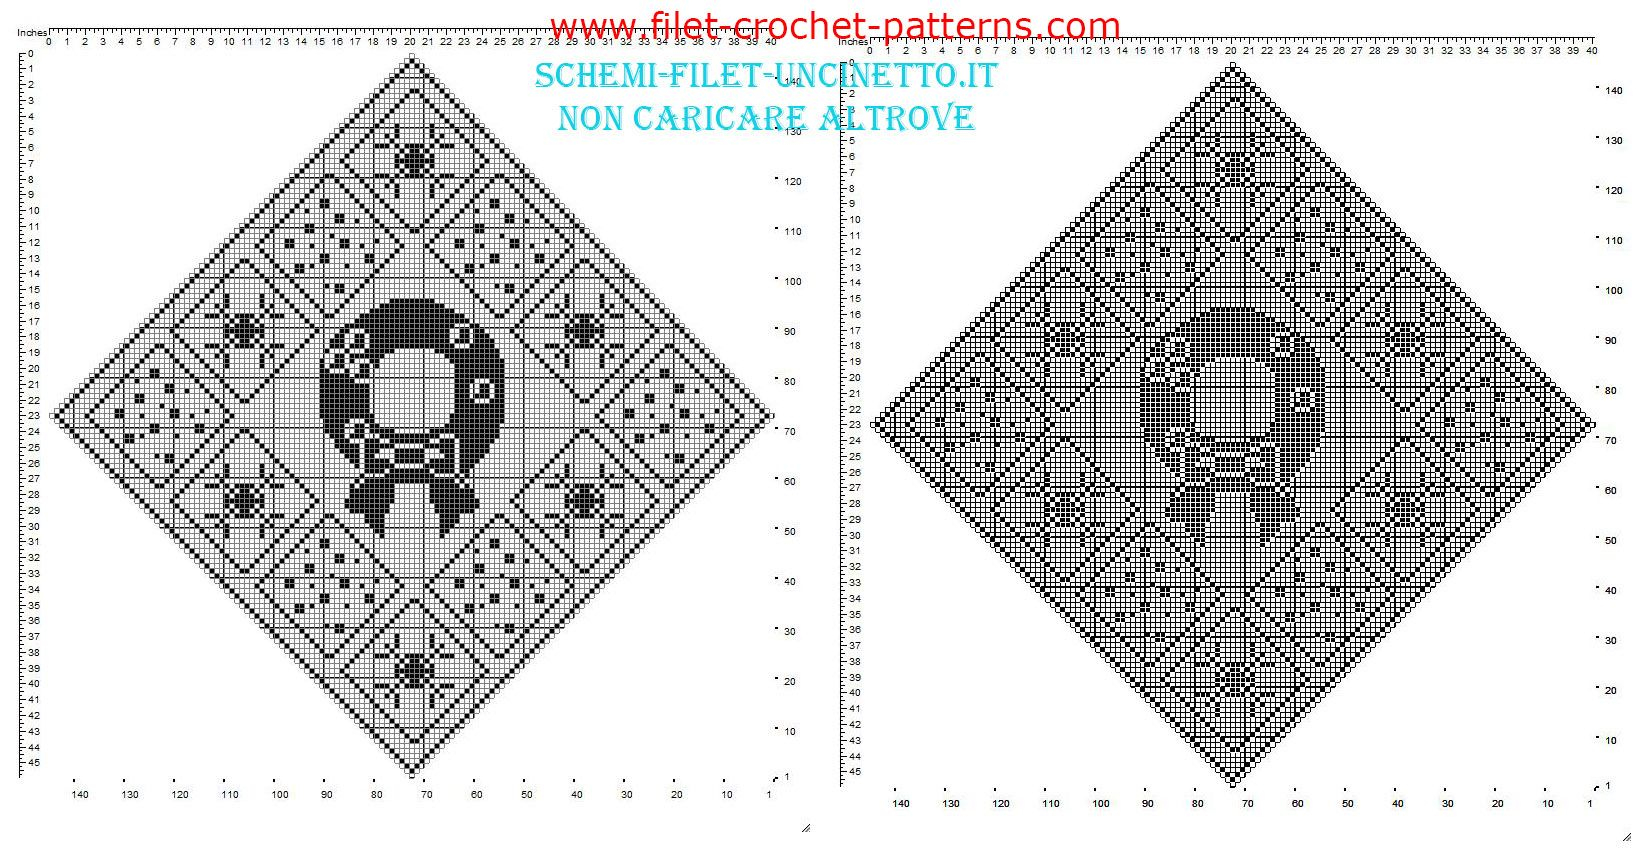 Christmas Filet Crochet Patterns Christmas Filet Placemat Diamond Shaped With Garland And Snowflakes